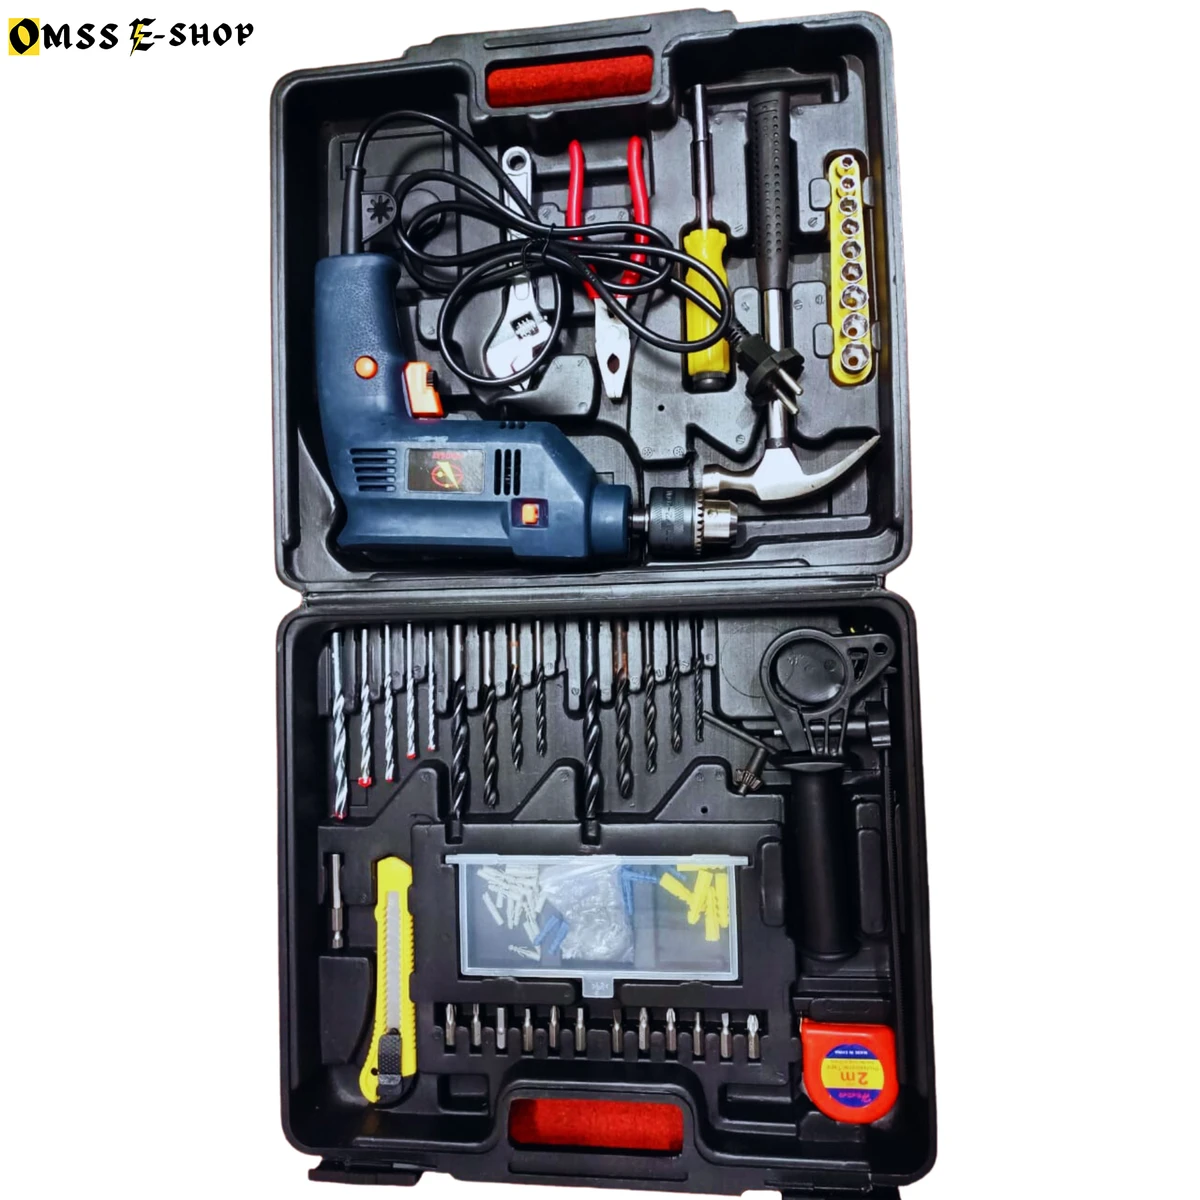 Professional Electric Drill Tool Kit with 10mm (500Watt) Heavy duty Impact Drill Machine (100 pcs Accessory set) RP-2450DH-AM